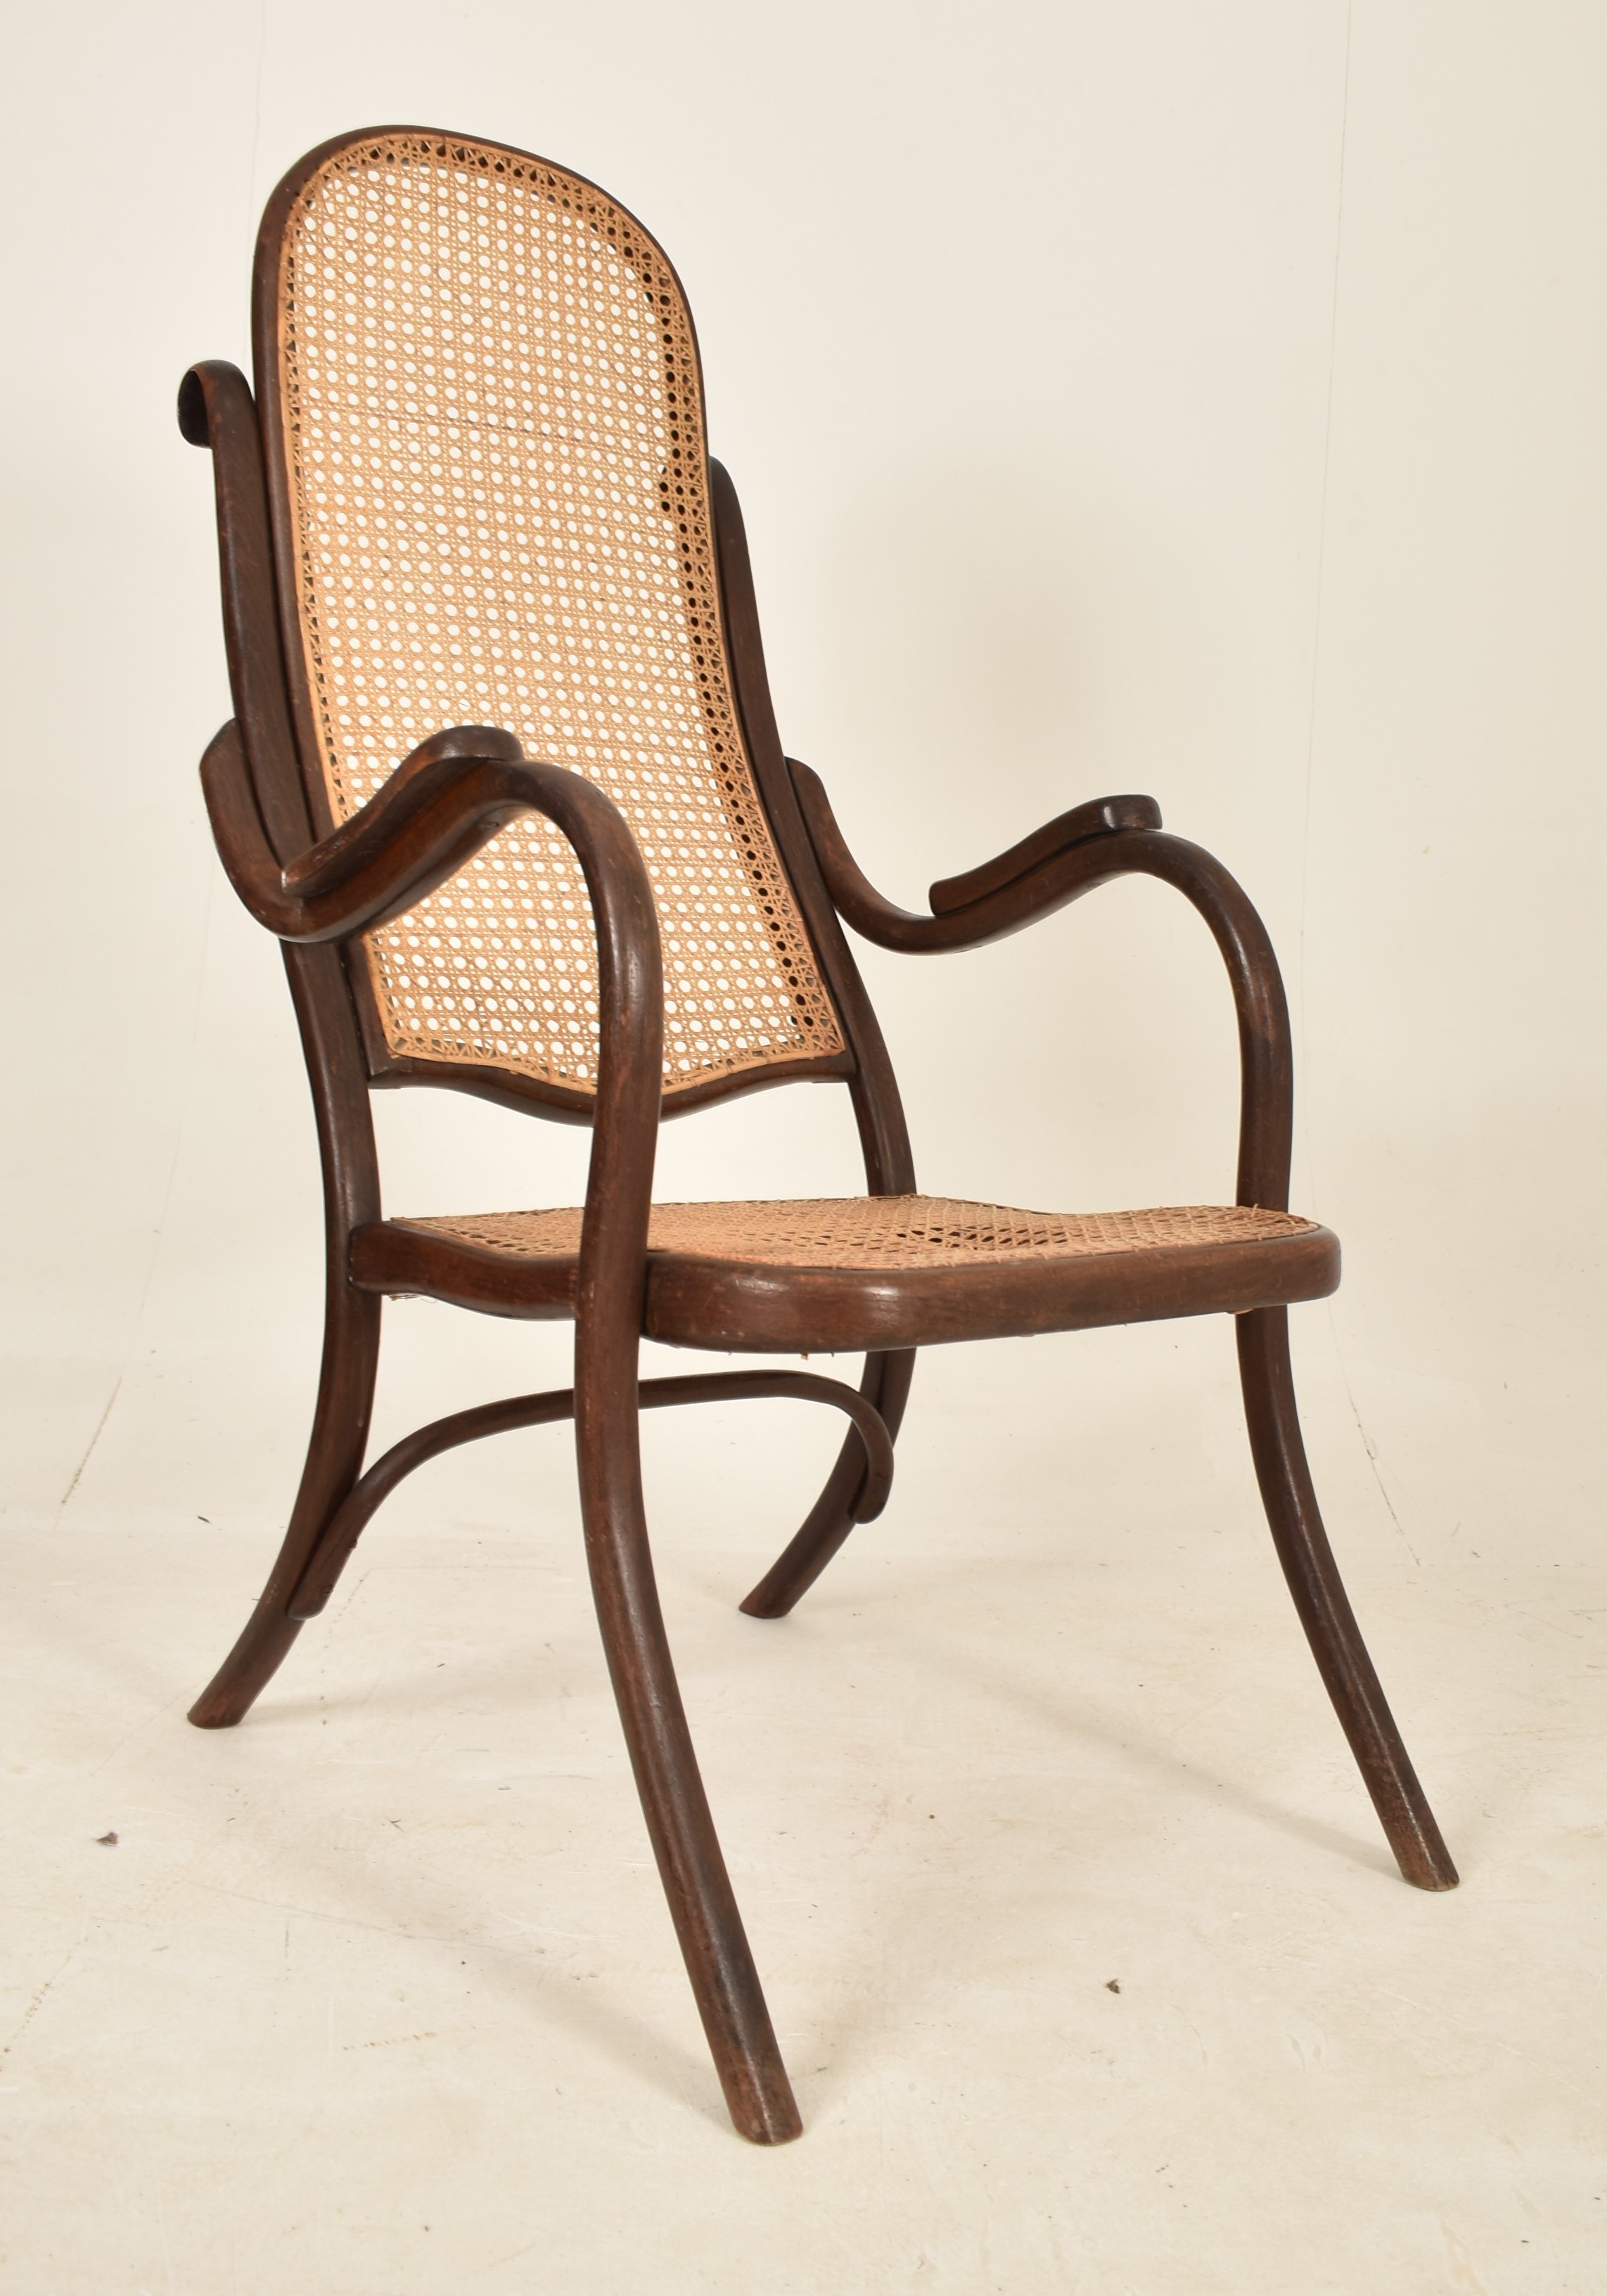 THONET - EARLY 20TH CENTURY BENTWOOD & CANE FIRESIDE ARMCHAIR